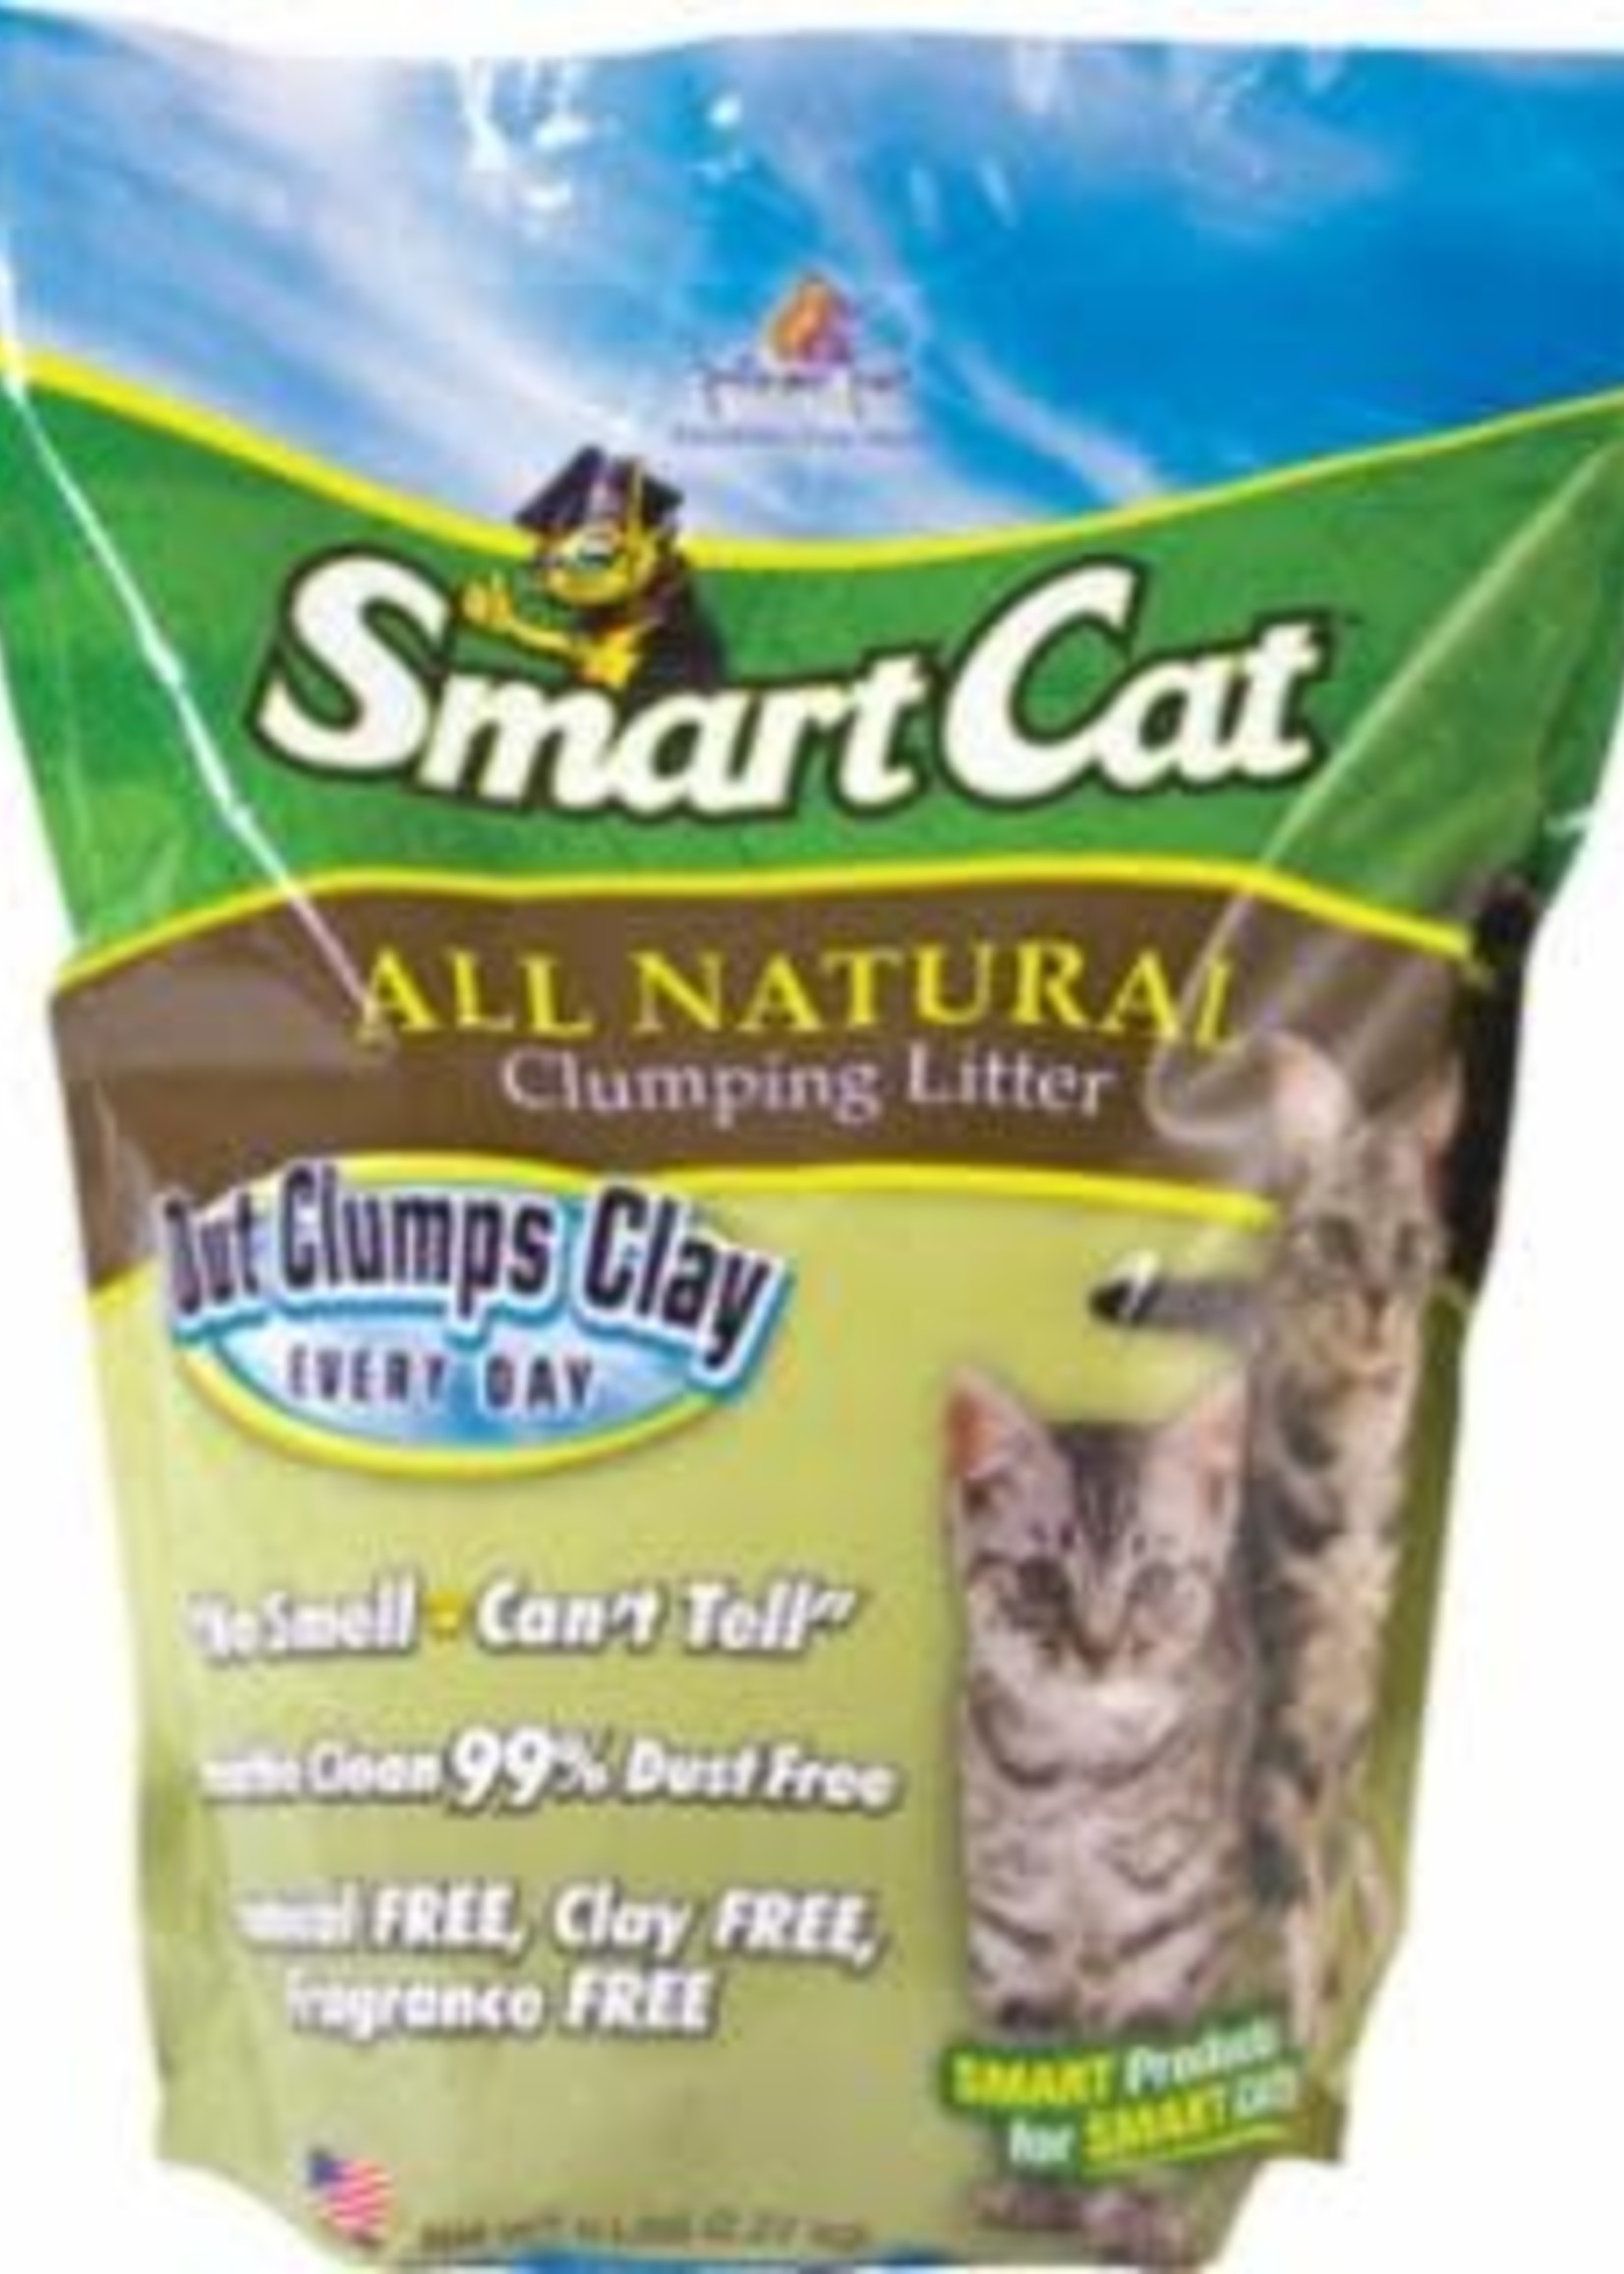 Pioneer Pet Products,LLC Pioneer Pet Smart Cat Clumping Litter 5 lbs